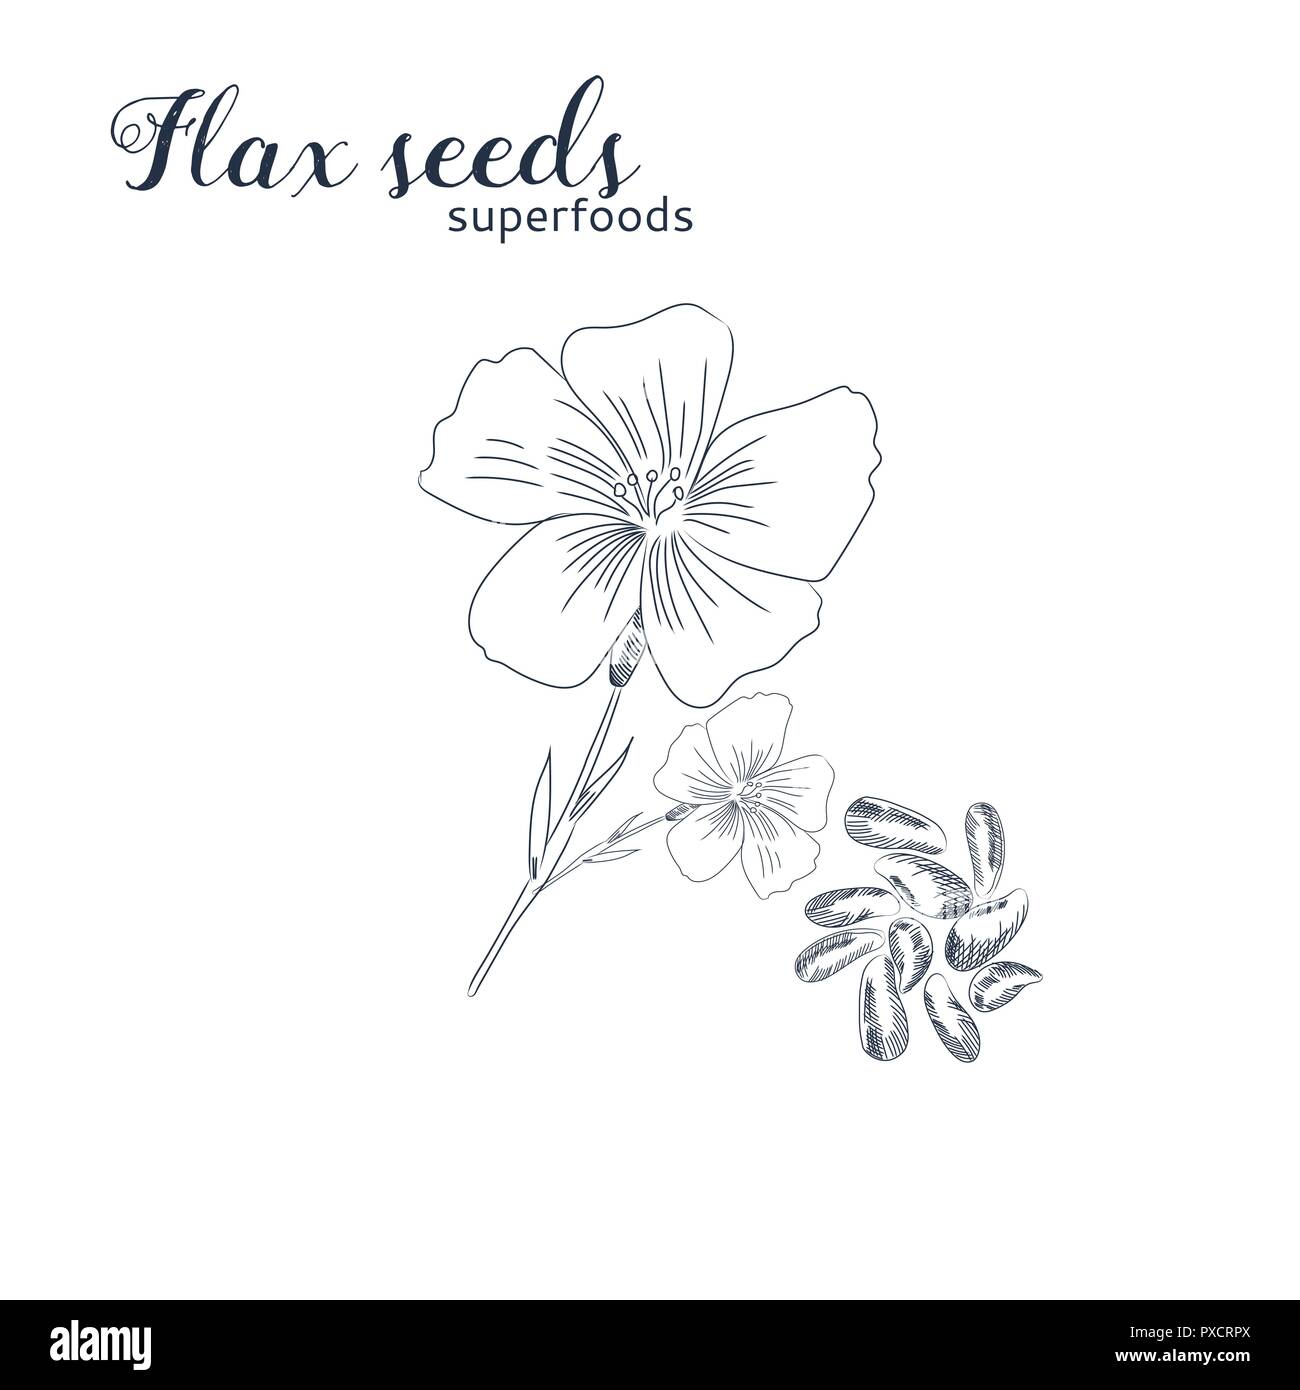 Flax seeds hand drawn sketch. Flax flower and seeds isolated on white background. Stock Vector